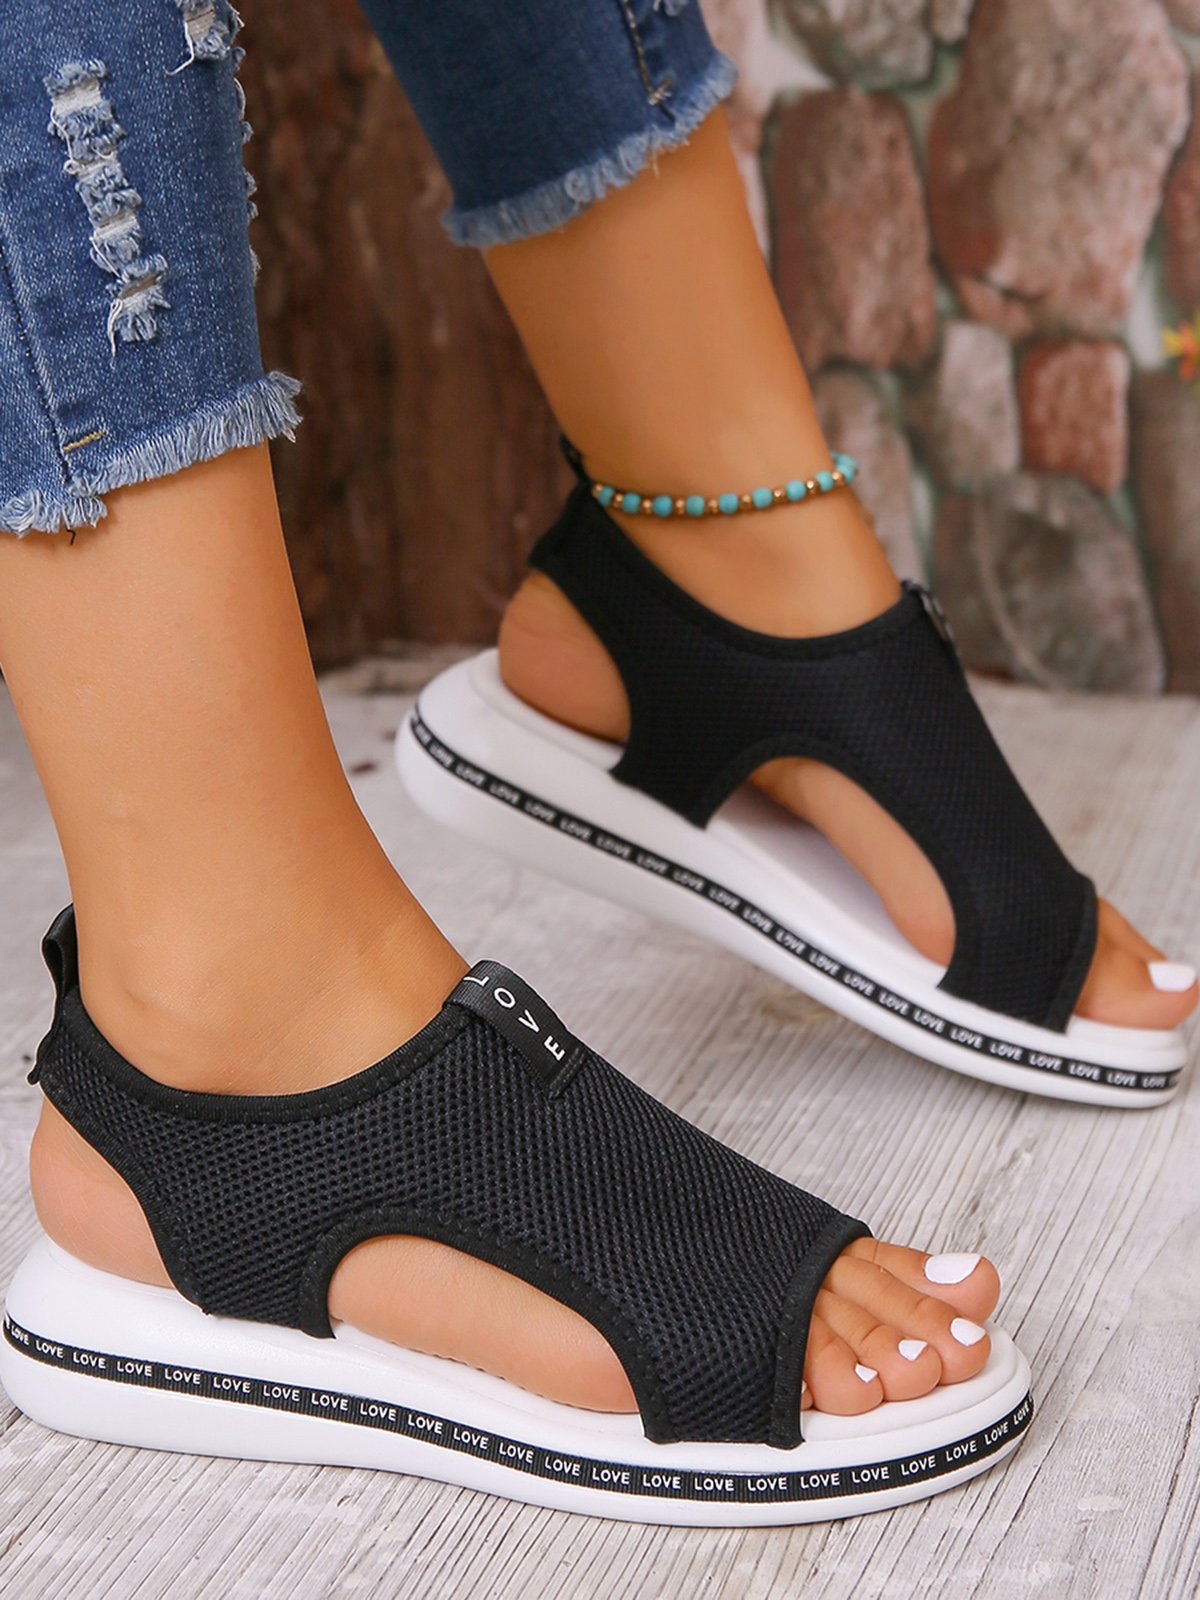 Breathable Mesh Fabric Cutout Slip On Sports Sandals